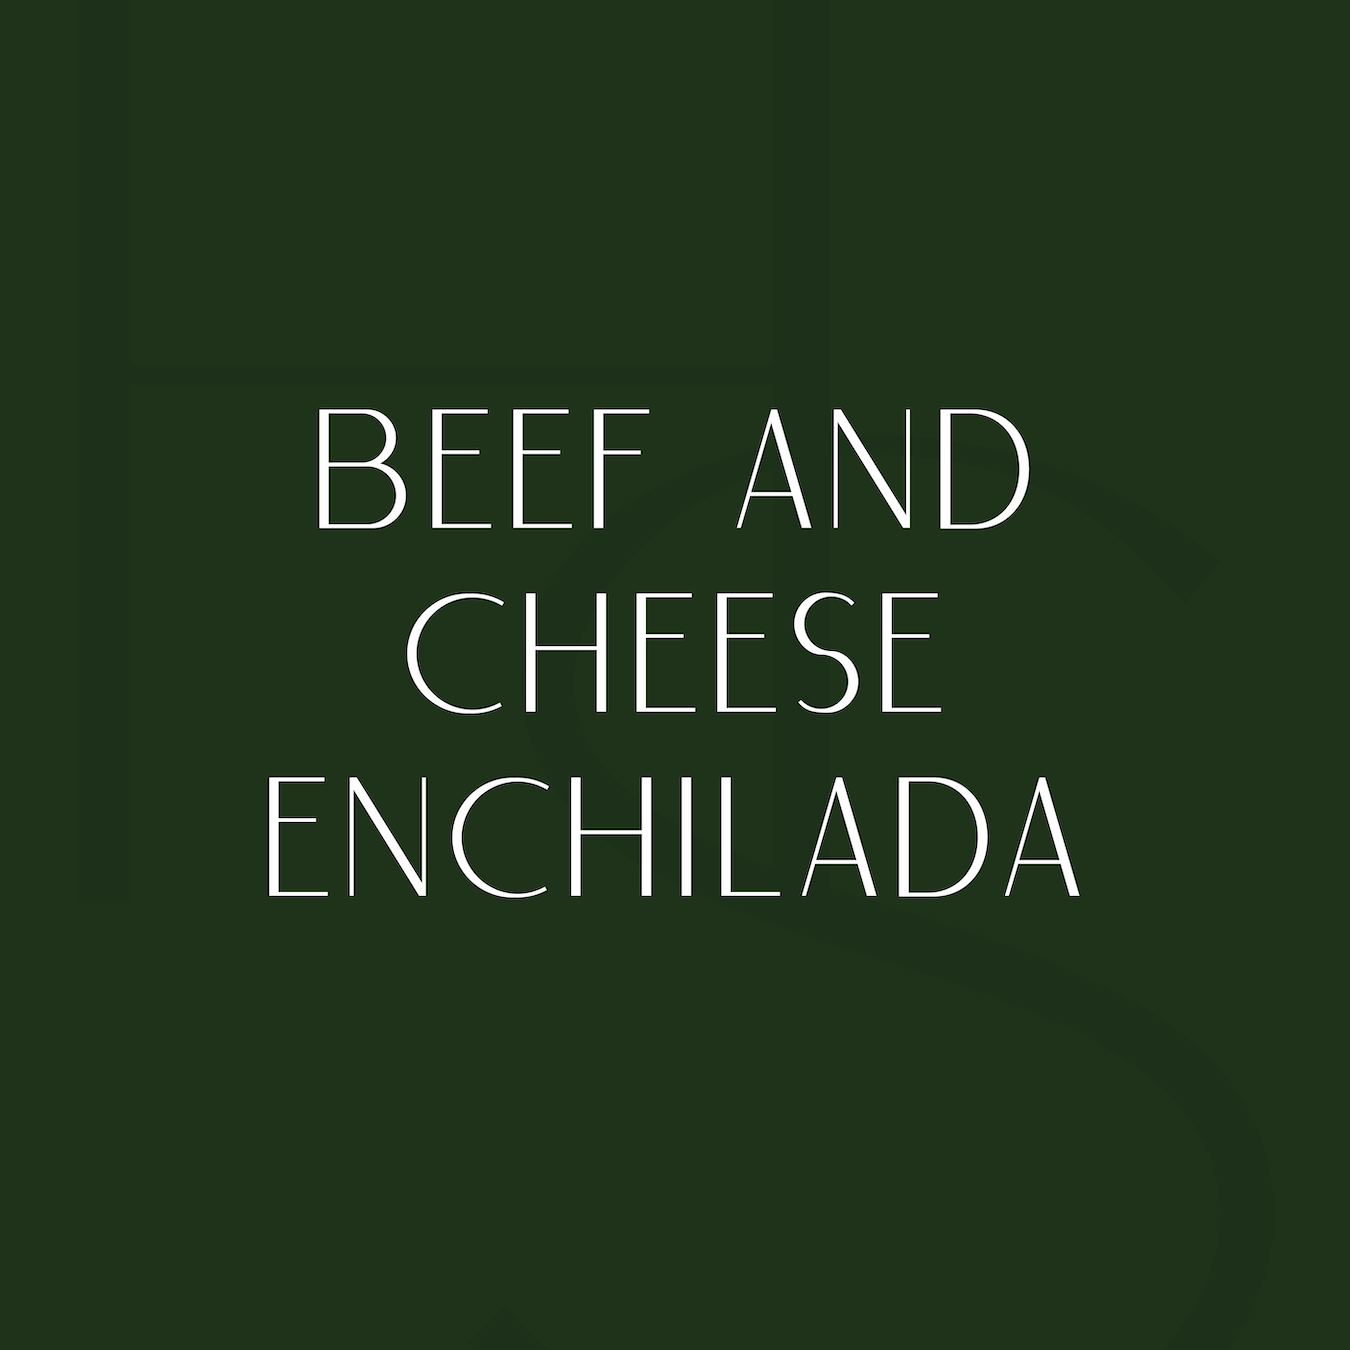 Beef and Cheese Enchilada